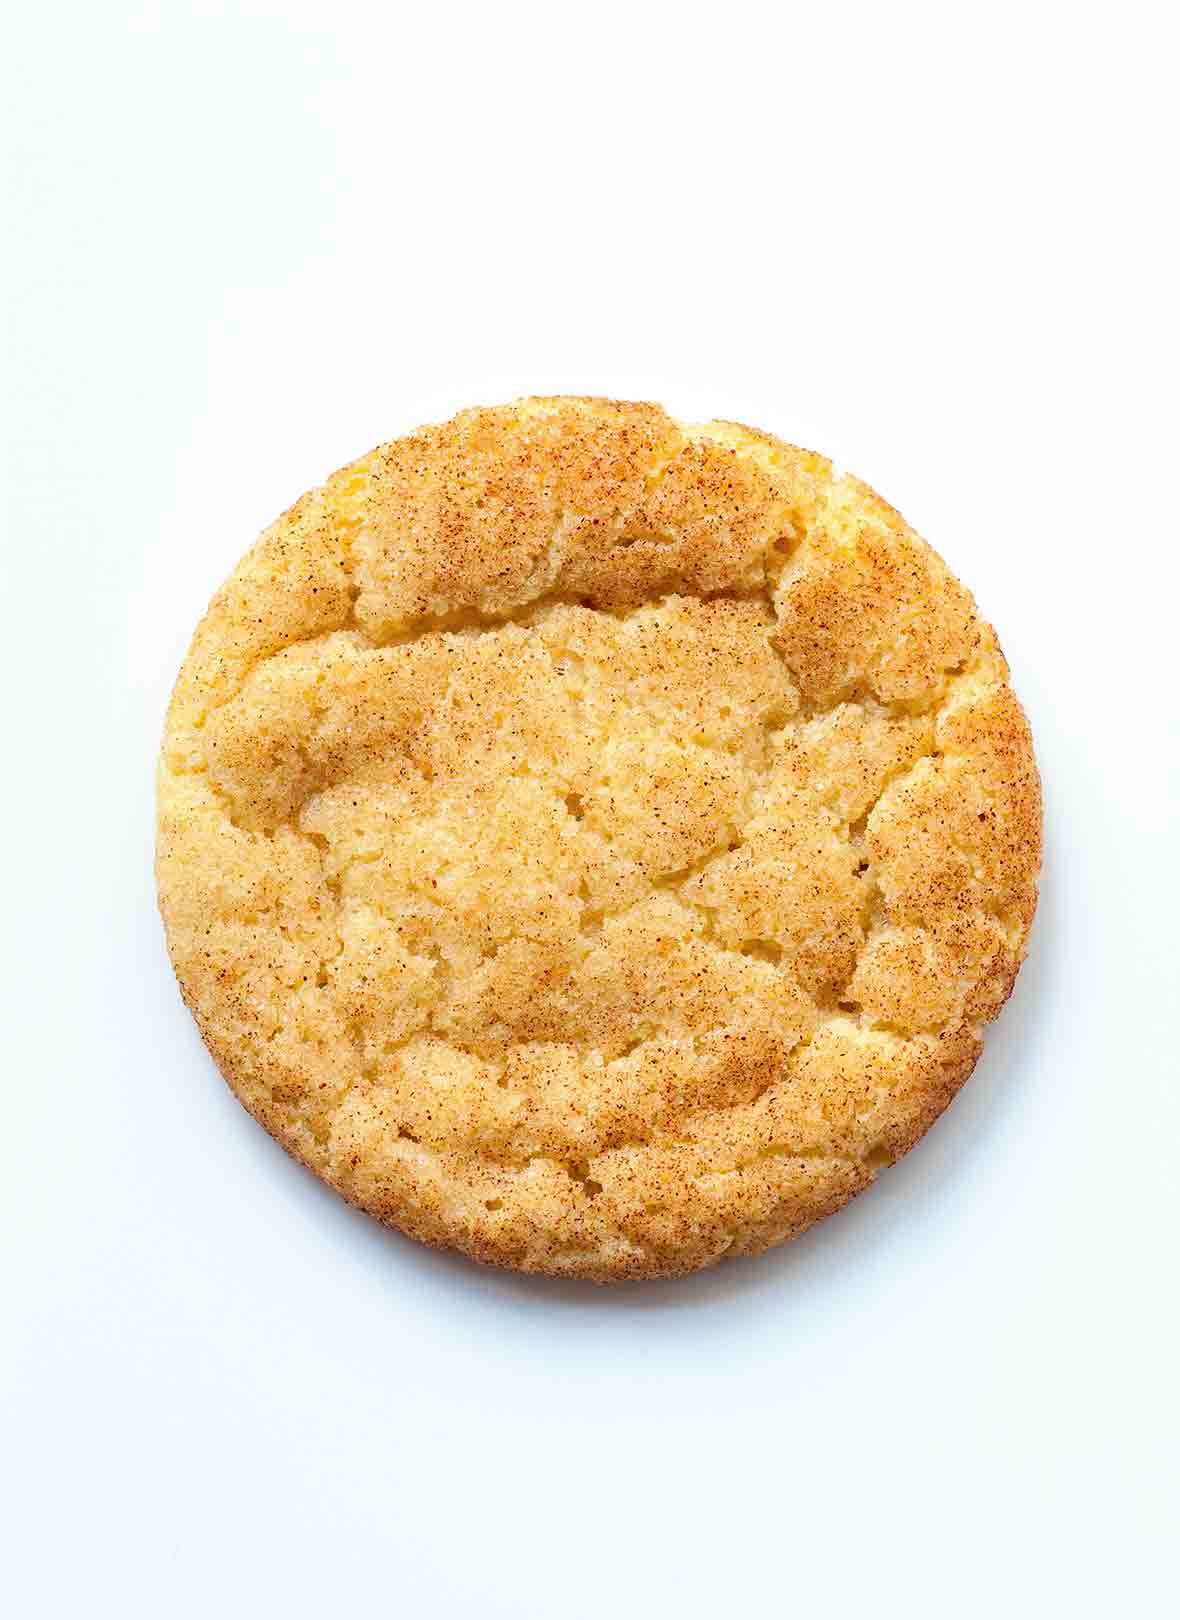 An overhead view of a single, perfectly baked snickerdoodle.